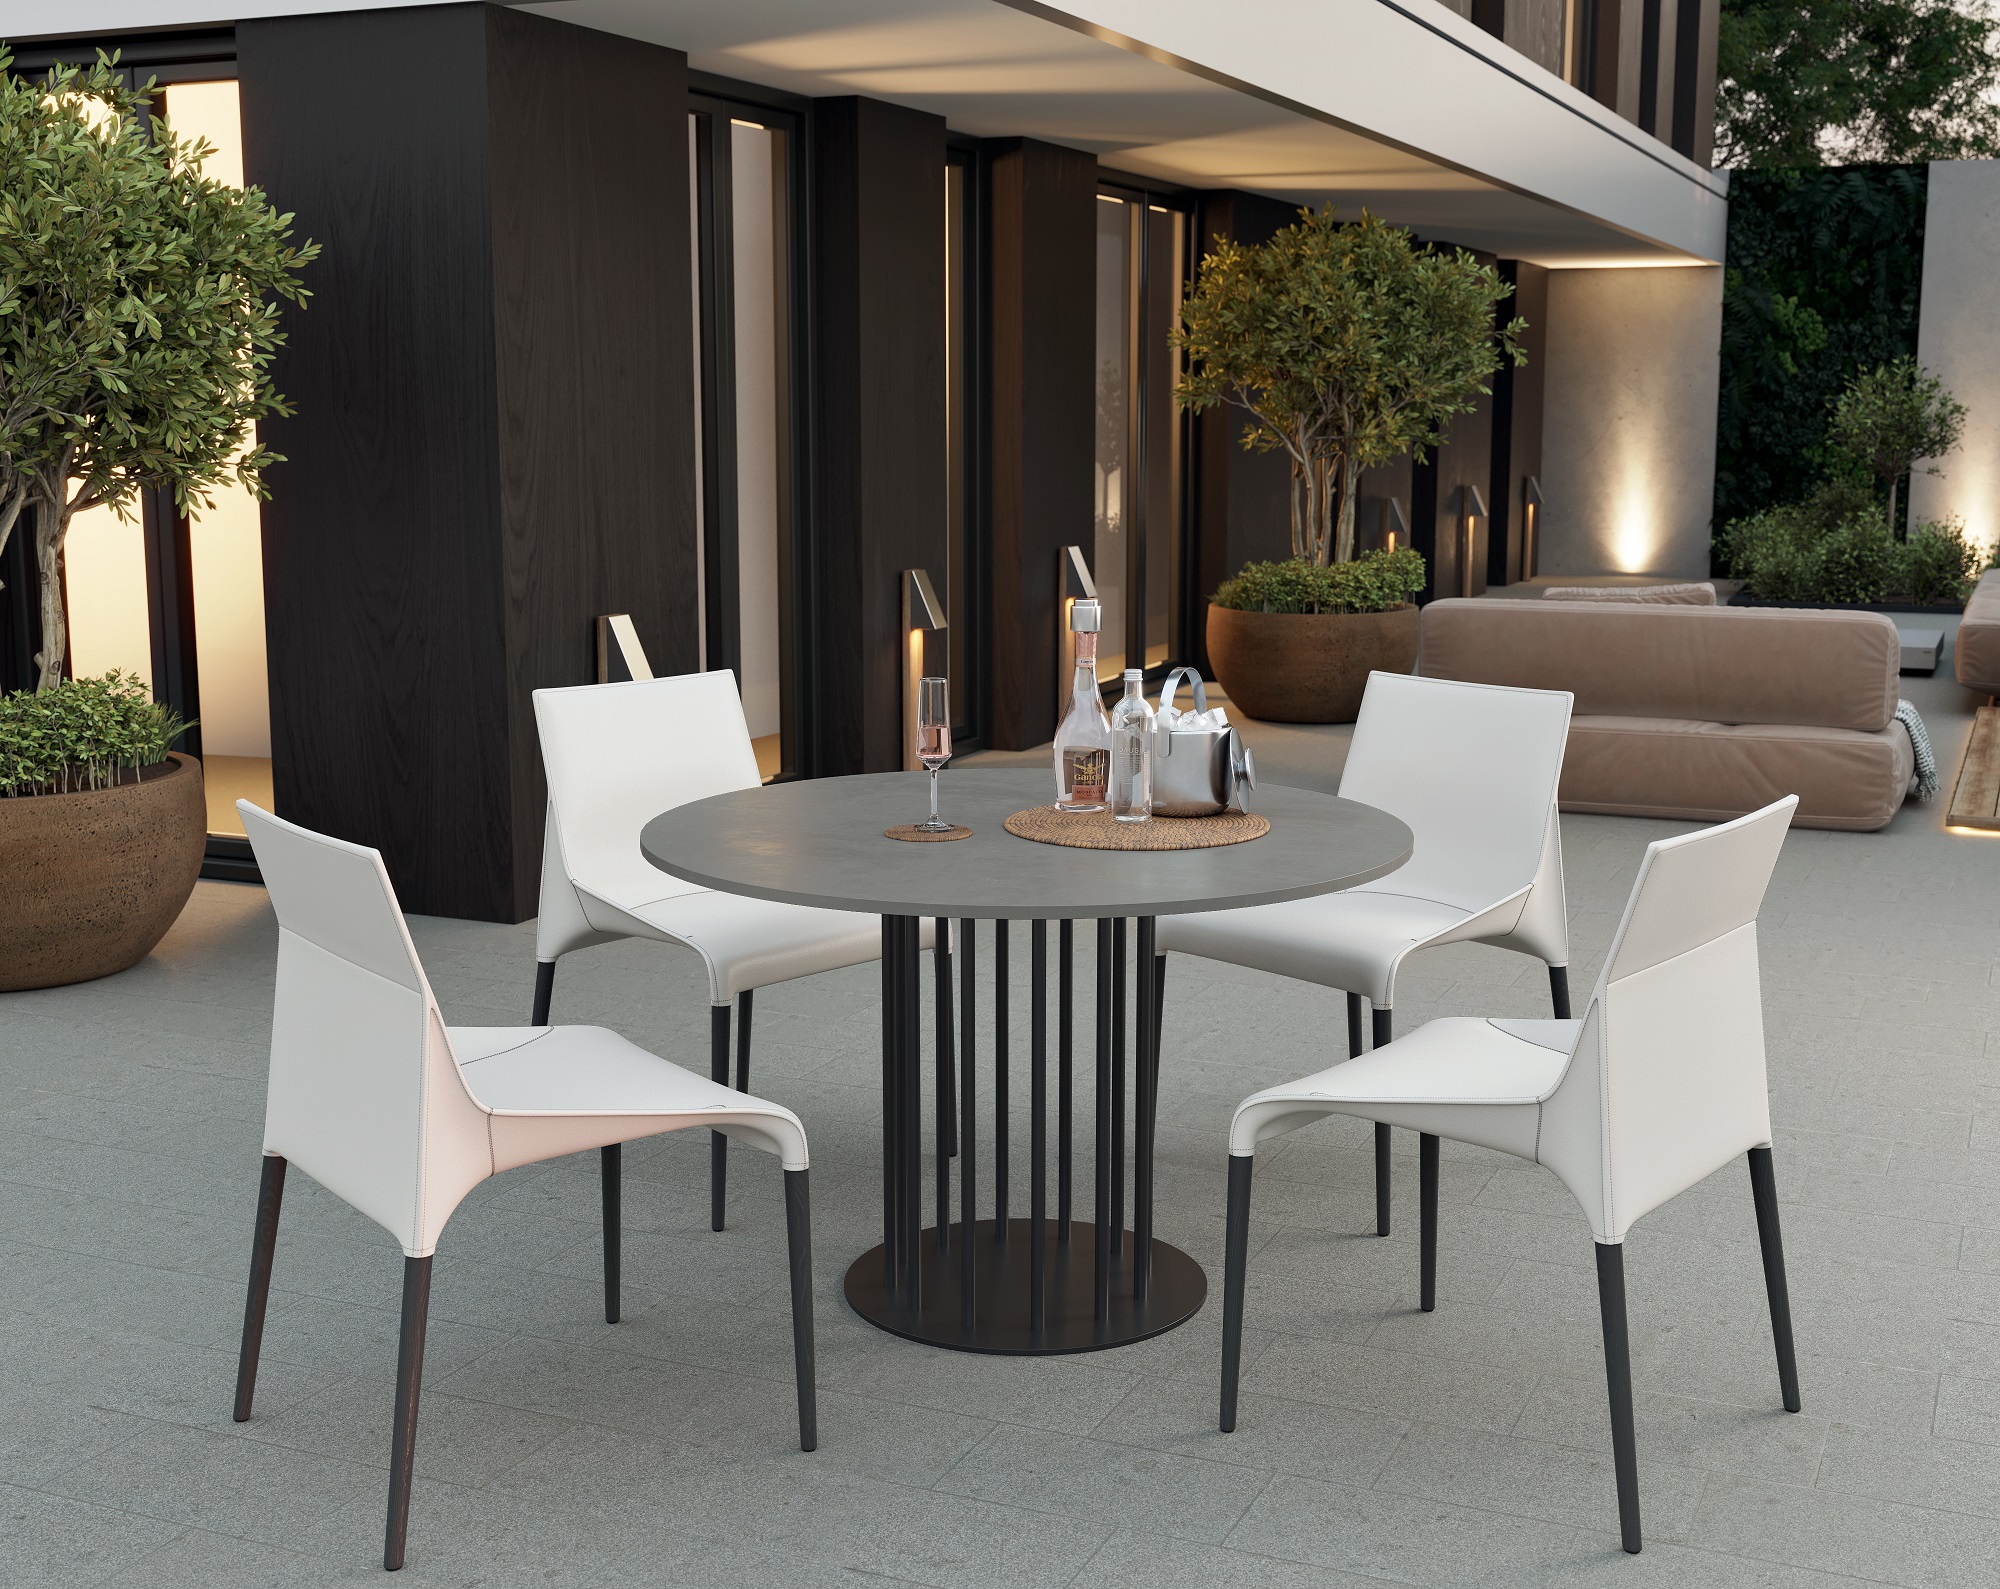 CO33 modern concrete dining table round for the terrace 120 cm concrete grey with black metal frame